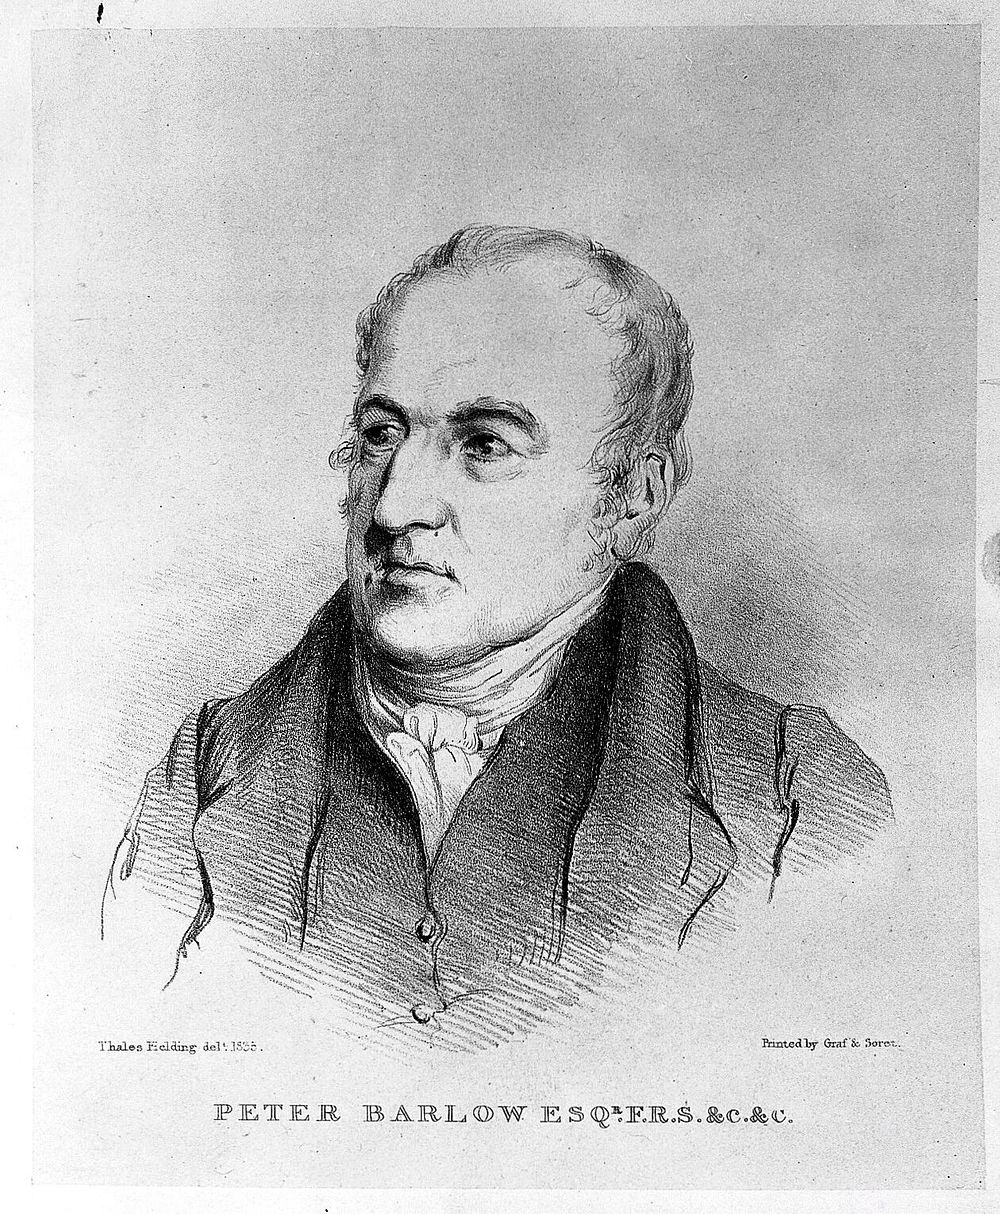 Peter Barlow. Stipple engraving after Thales Fielding, 1835.